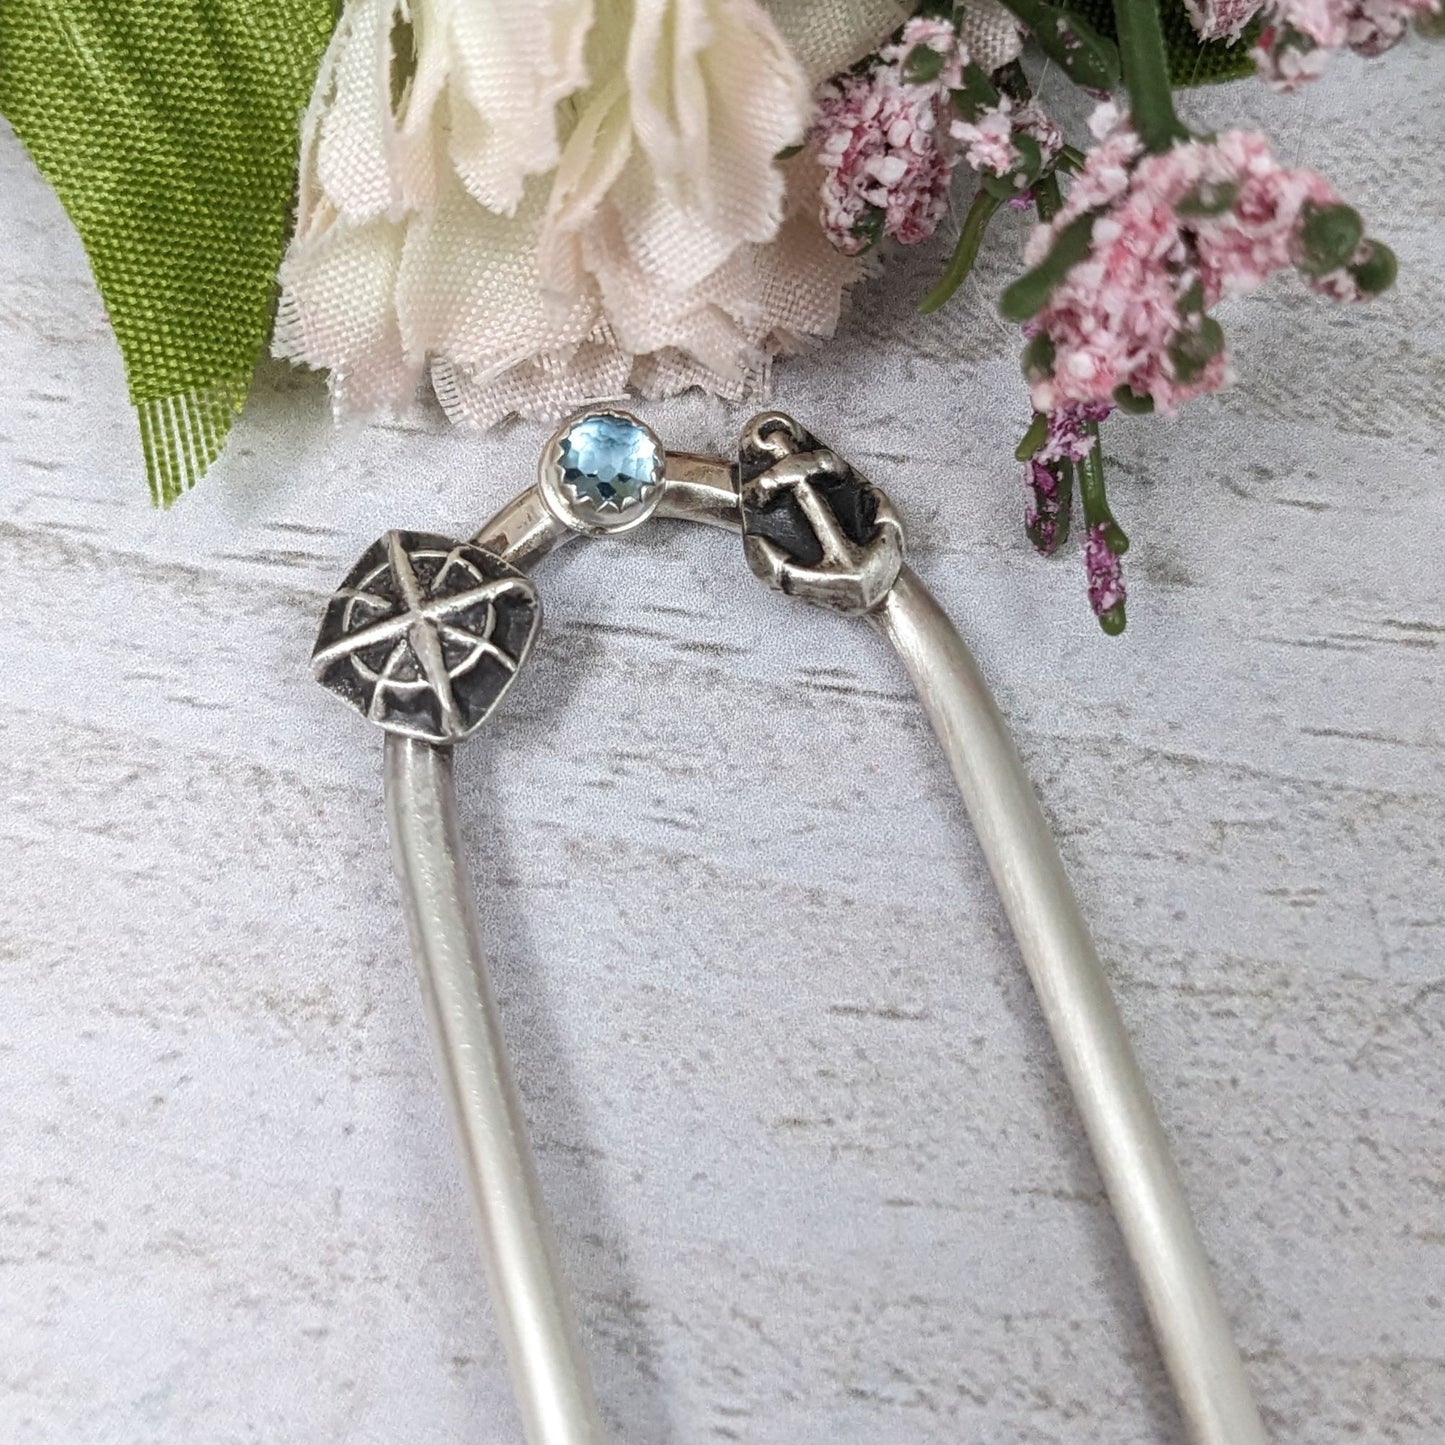 Sterling silver hair fork with three small design elements. Left is a silver compass rose, center is a rose cut blue topaz gemstone, right is a silver anchor